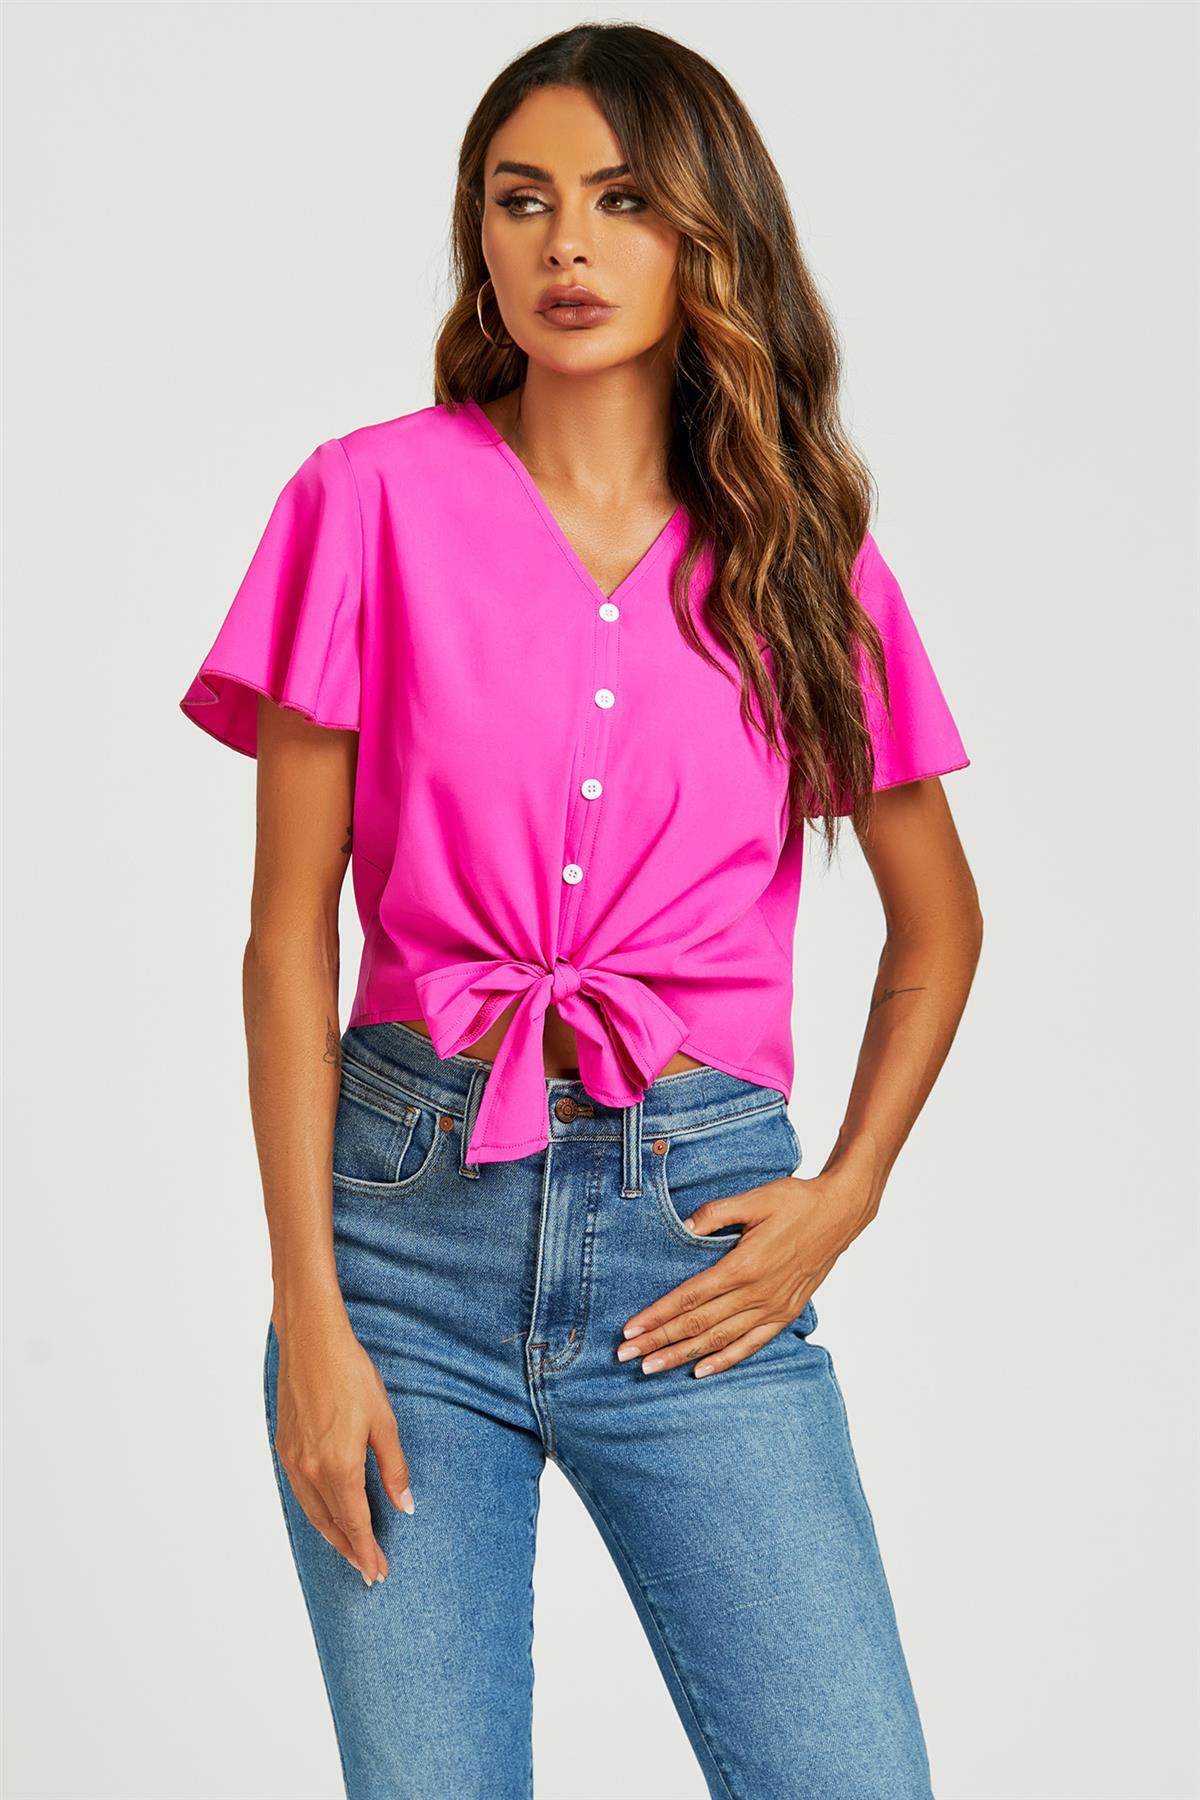 Cute Tie Knot Front Buttoned Crop T Shirt Top In Fuchsia Pink FS21168